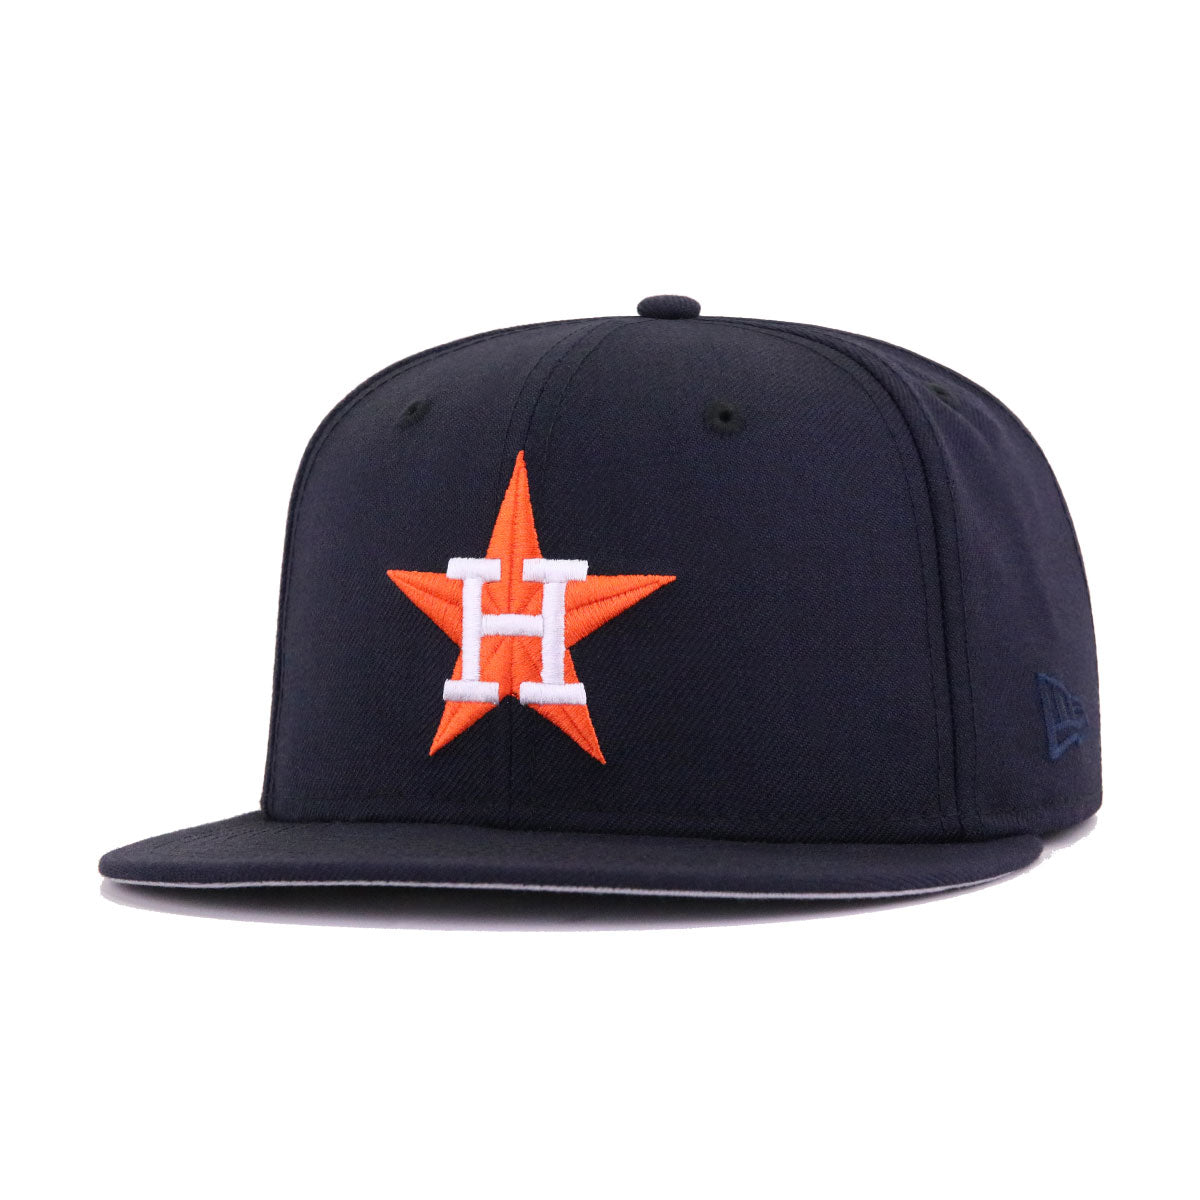 Exclusive Houston Astros 7 1/2 Fitted Hat 1968 All Star Game Black